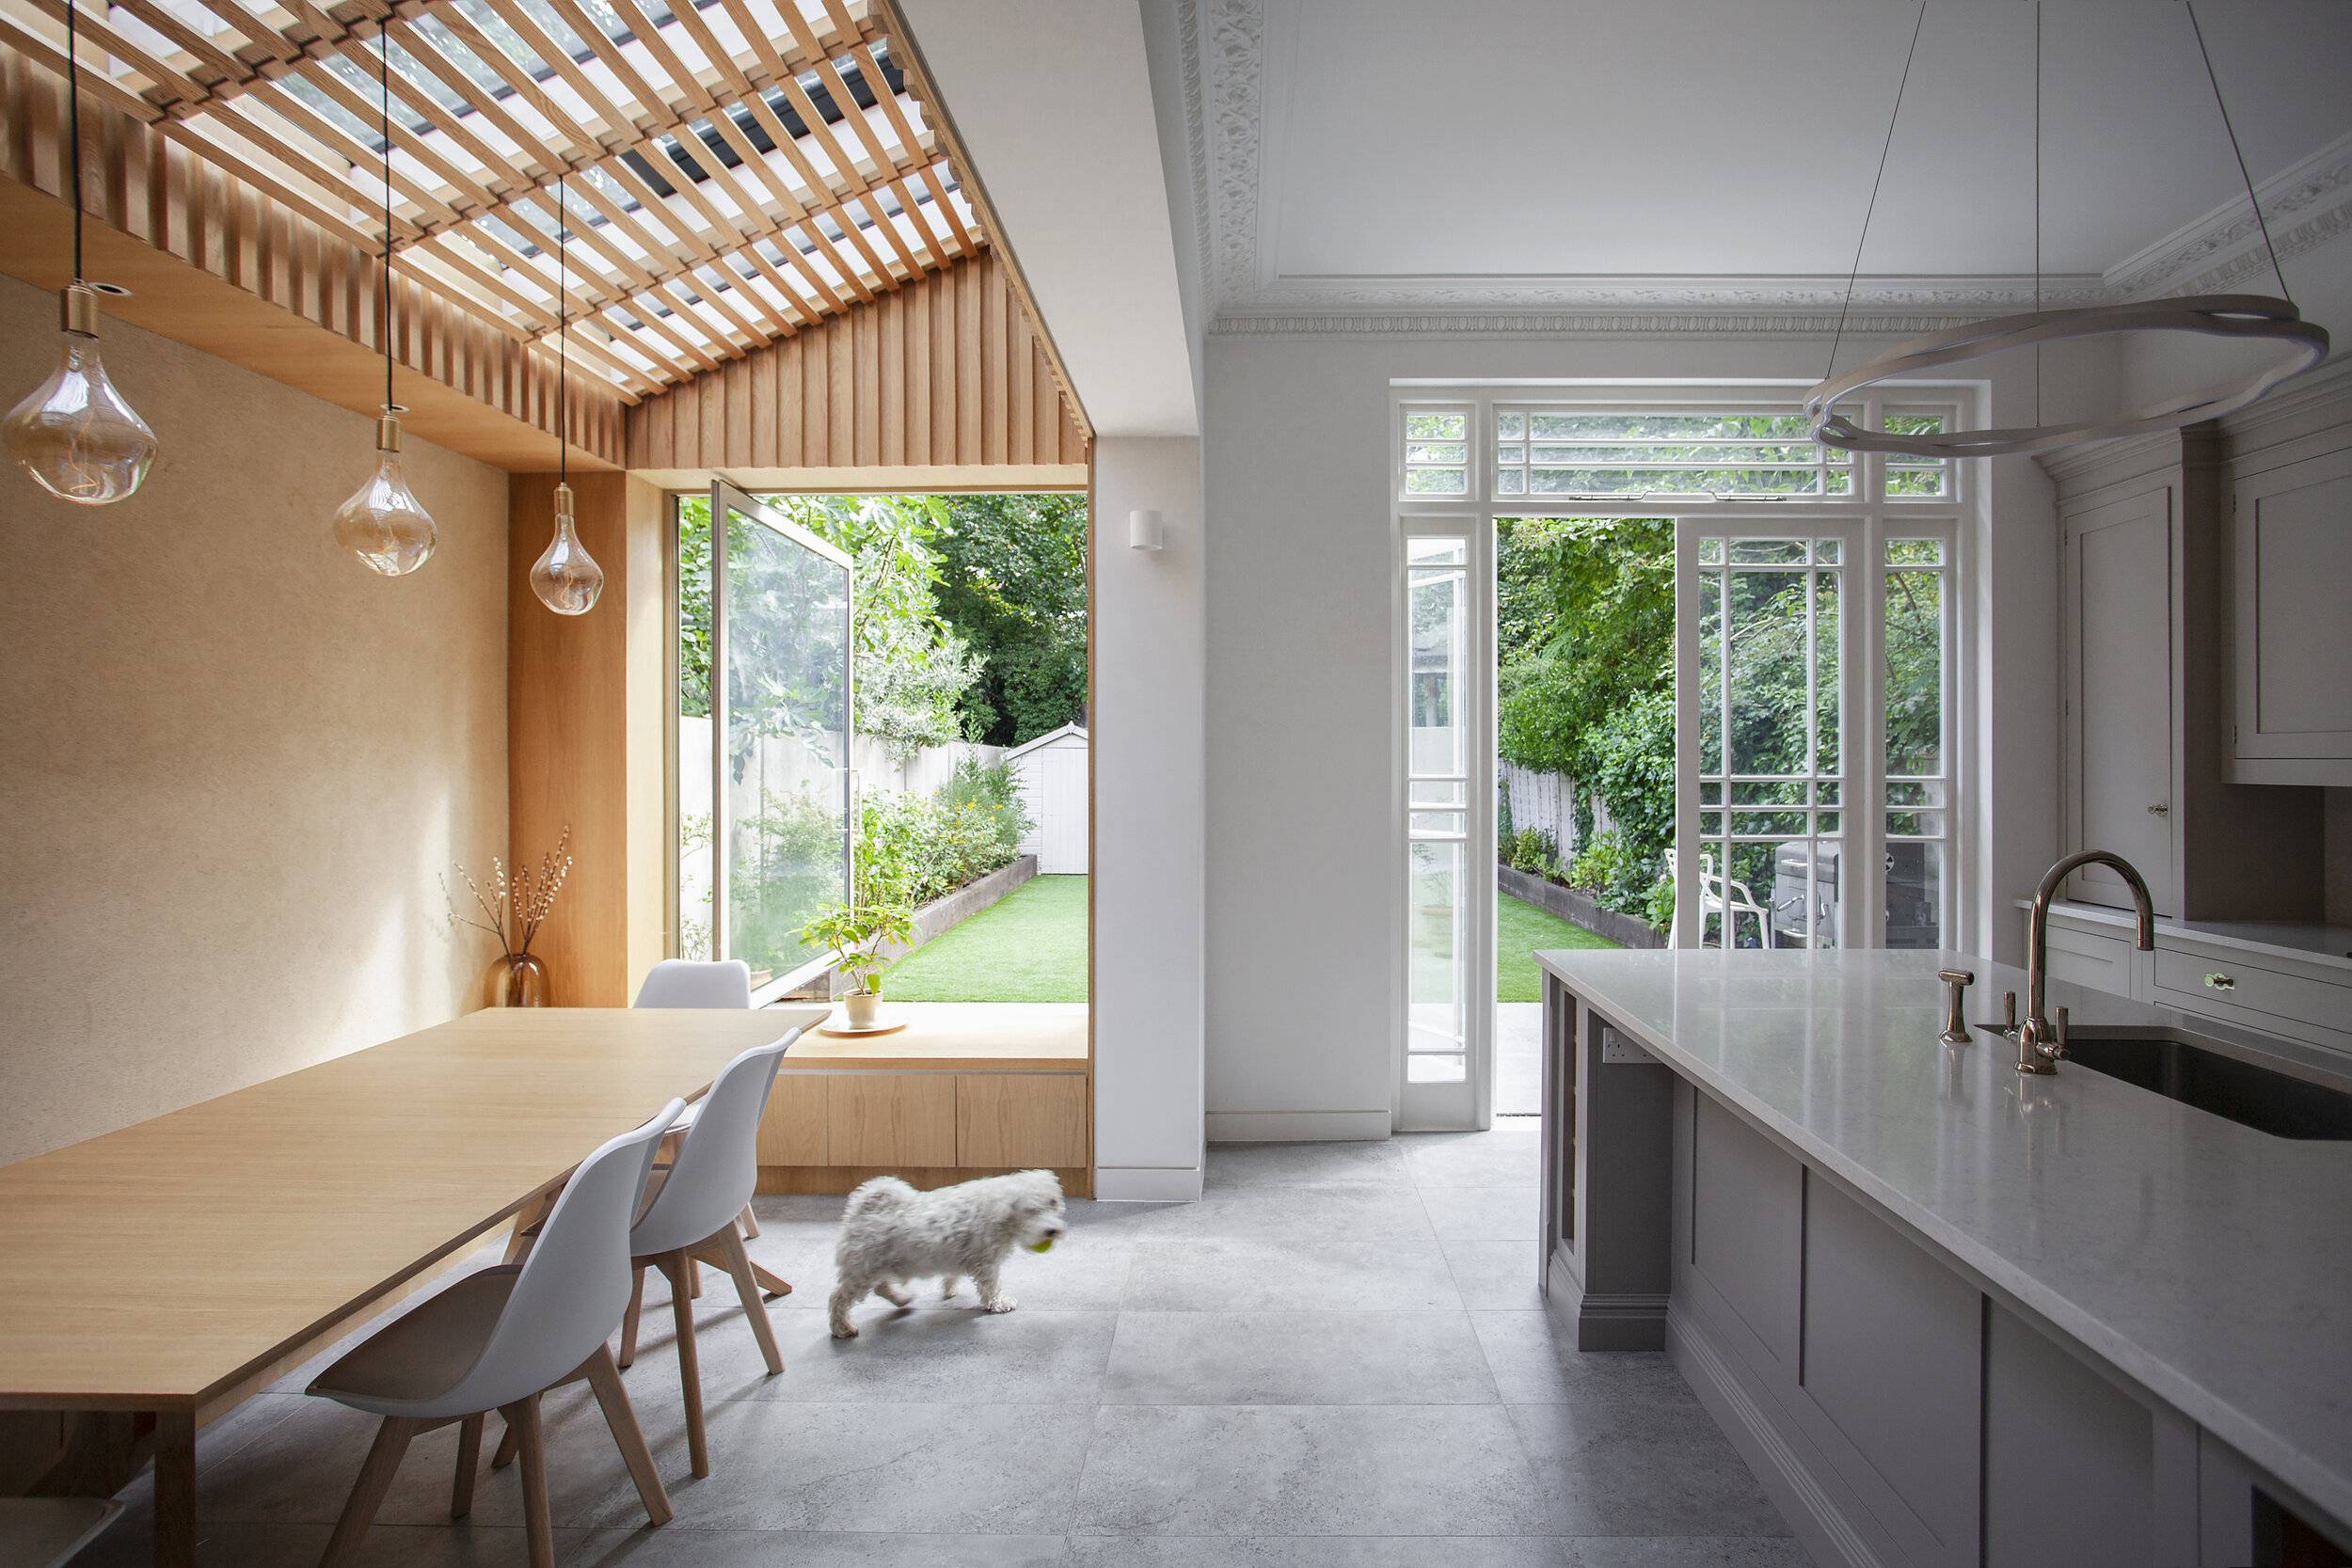 Old side return of classic home in Whitehall Park Conservation Area in Islington turned into a modern kitchen and dining area